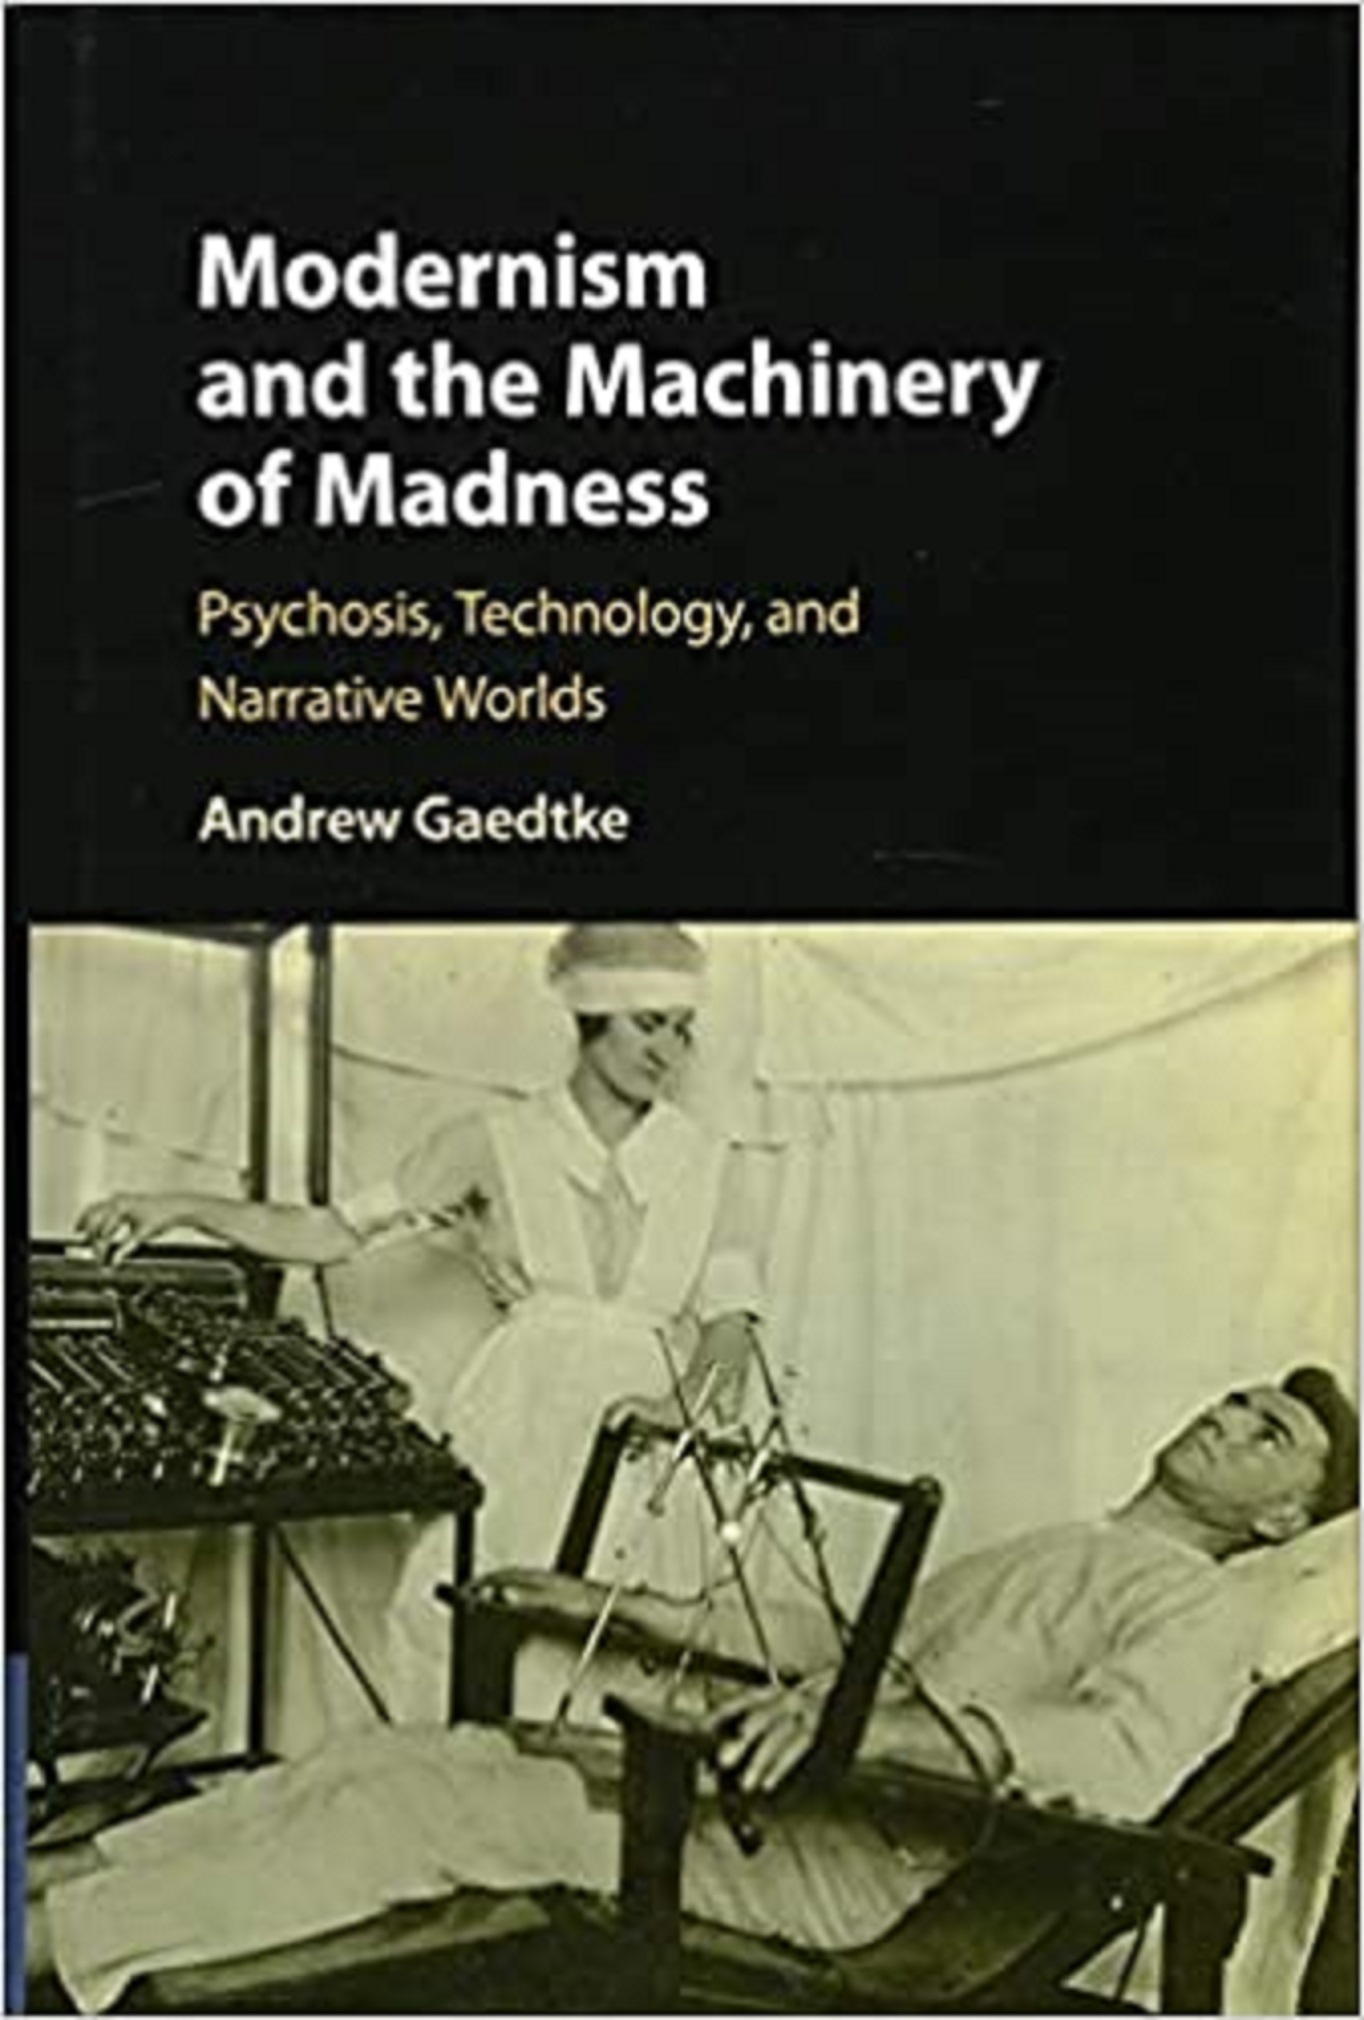 Modernism and the Machinery of Madness